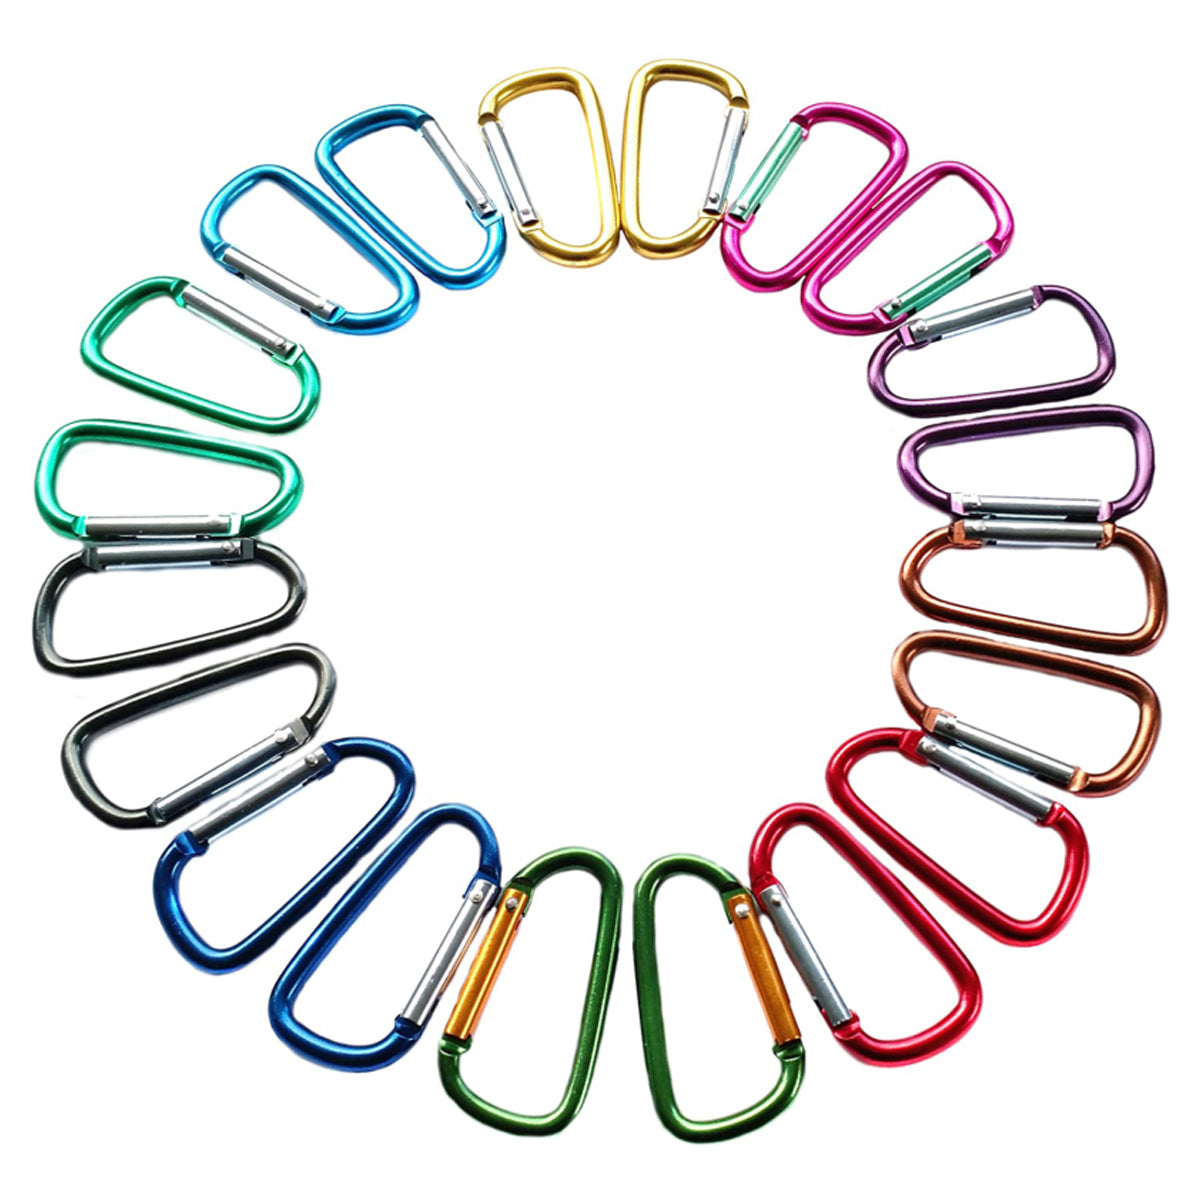 2.25 Carabiner Keychain, Small Carabiner Clip In Many Colors